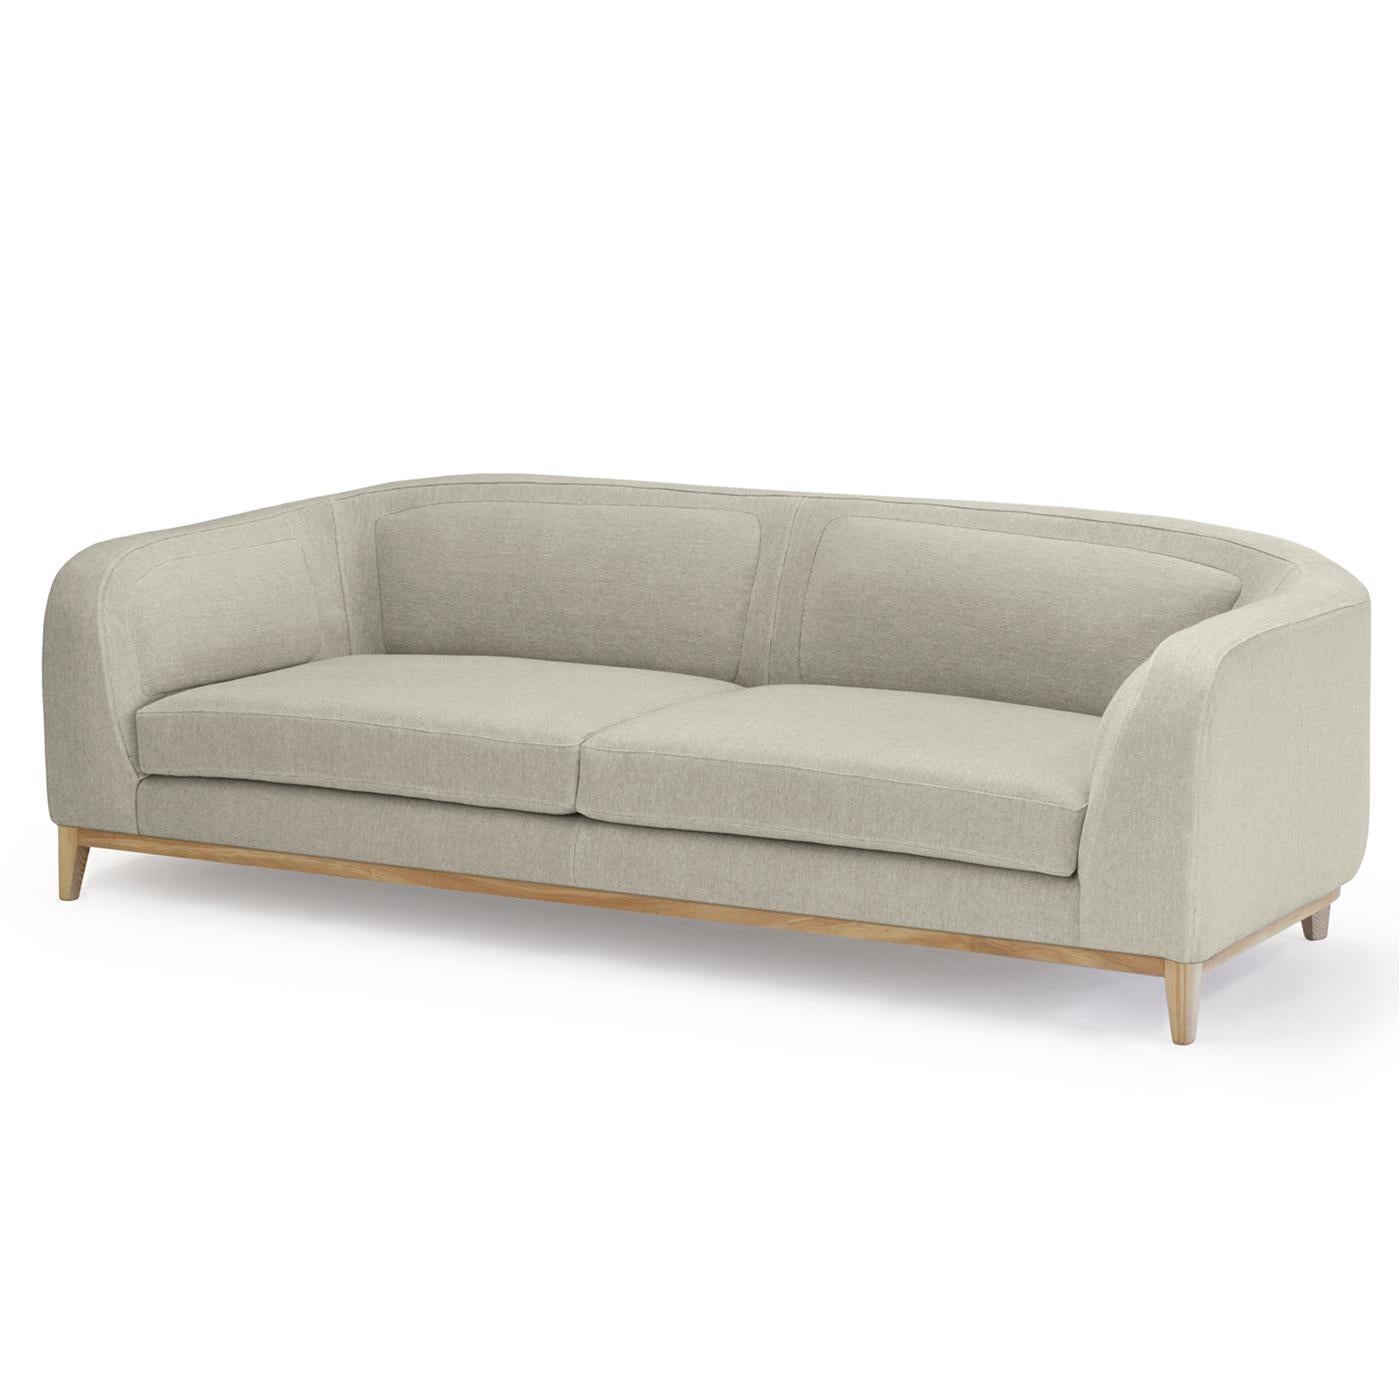 Contemporary and compact, this playful Zeno Beige Sofa by Brian Sironi adds style to any room. Featuring a mid-century classic design with a modern twist, the legs and entire framework are crafted in solid beech wood and the seat and back have